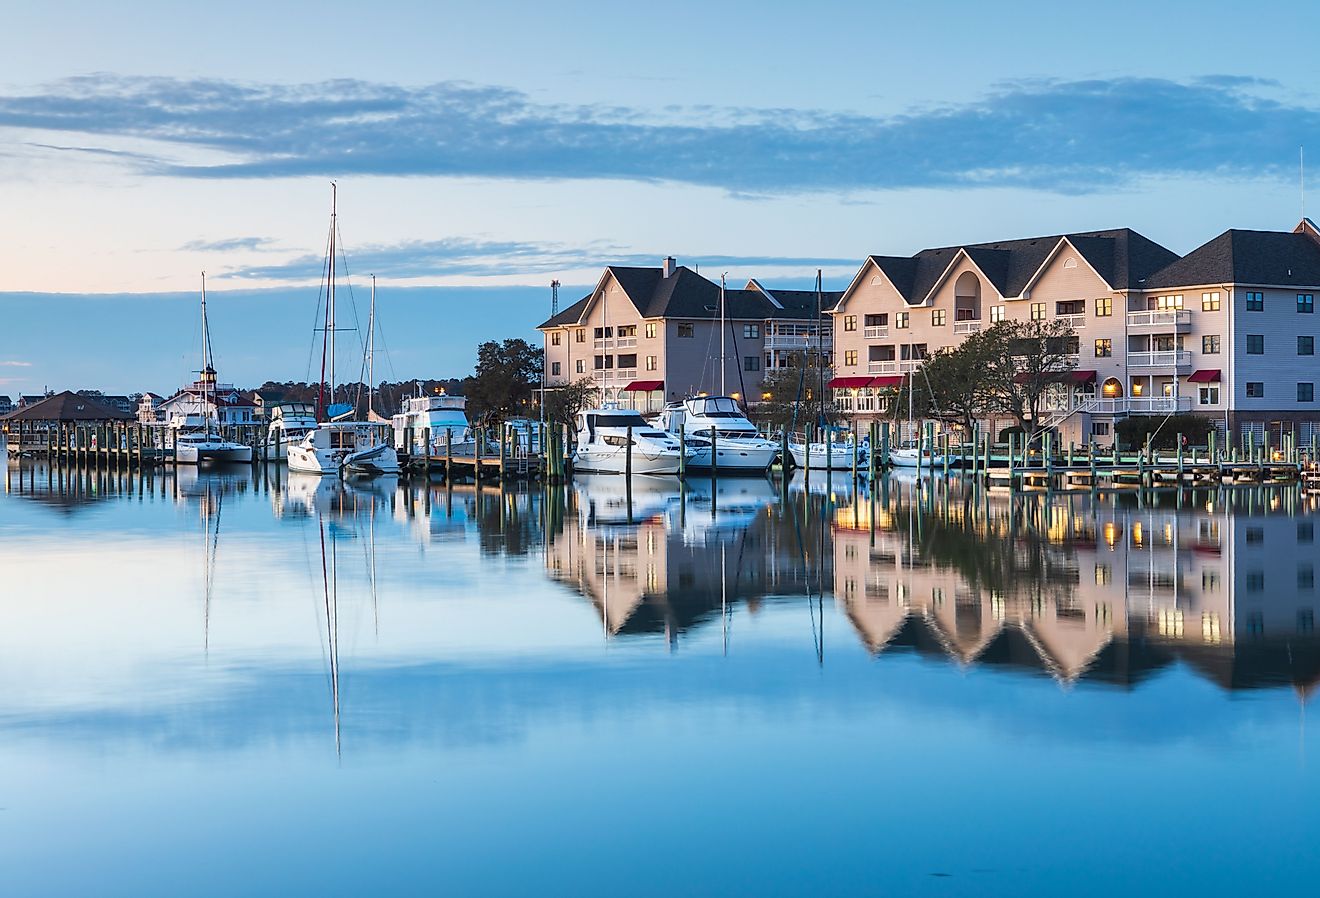 View of the town of Manteo's waterfront marina at daybreak in the Outer Banks of North Carolina.